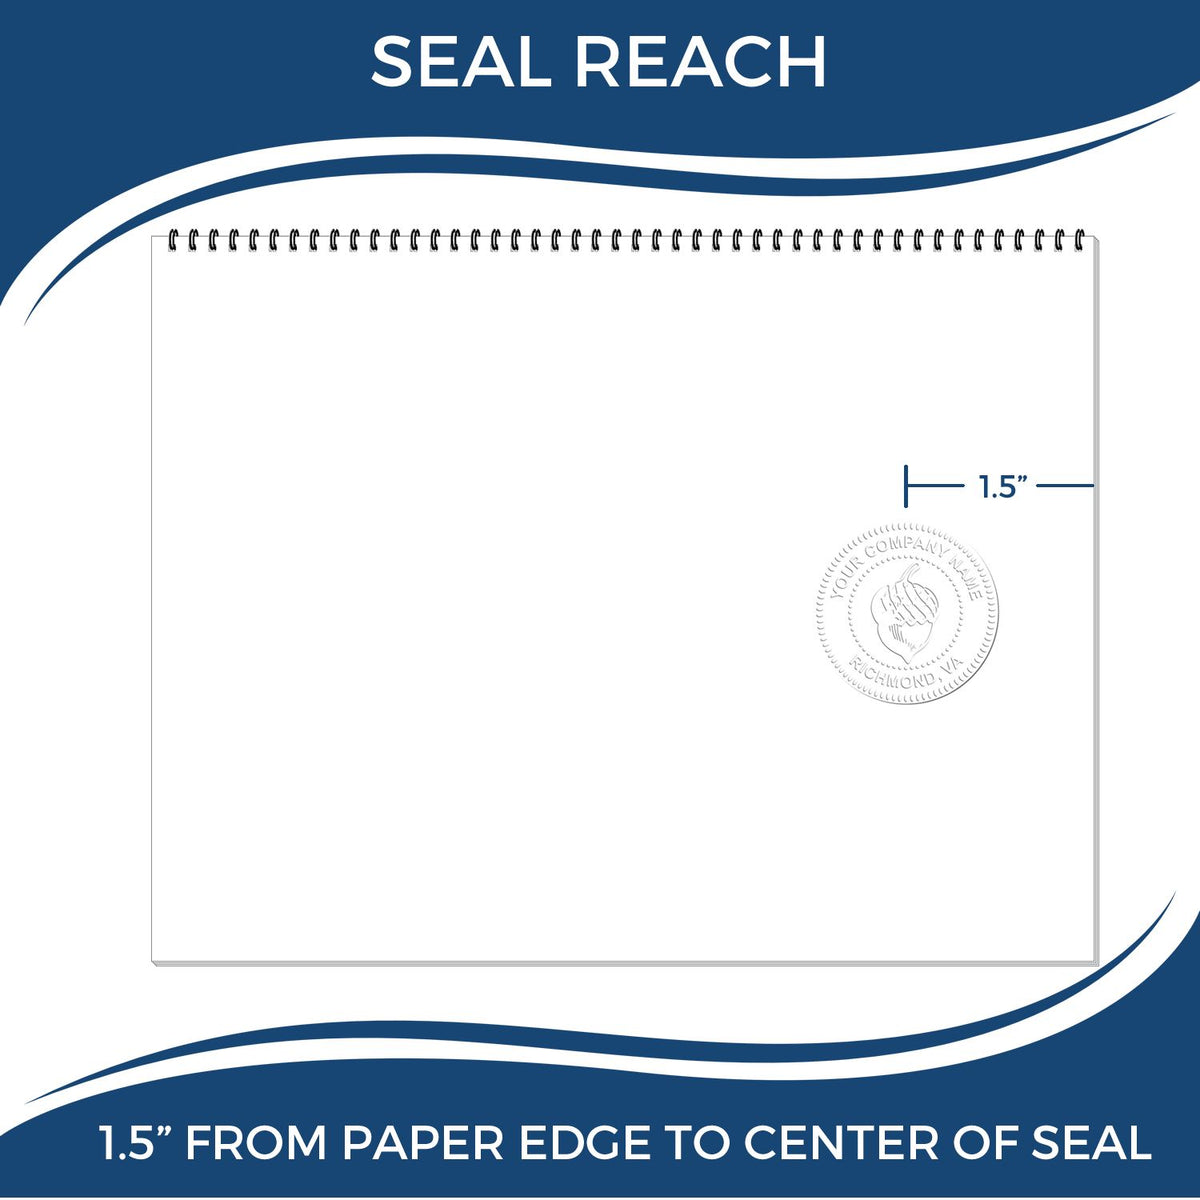 An infographic showing the seal reach which is represented by a ruler and a miniature seal image of the State of Indiana Soft Land Surveyor Embossing Seal